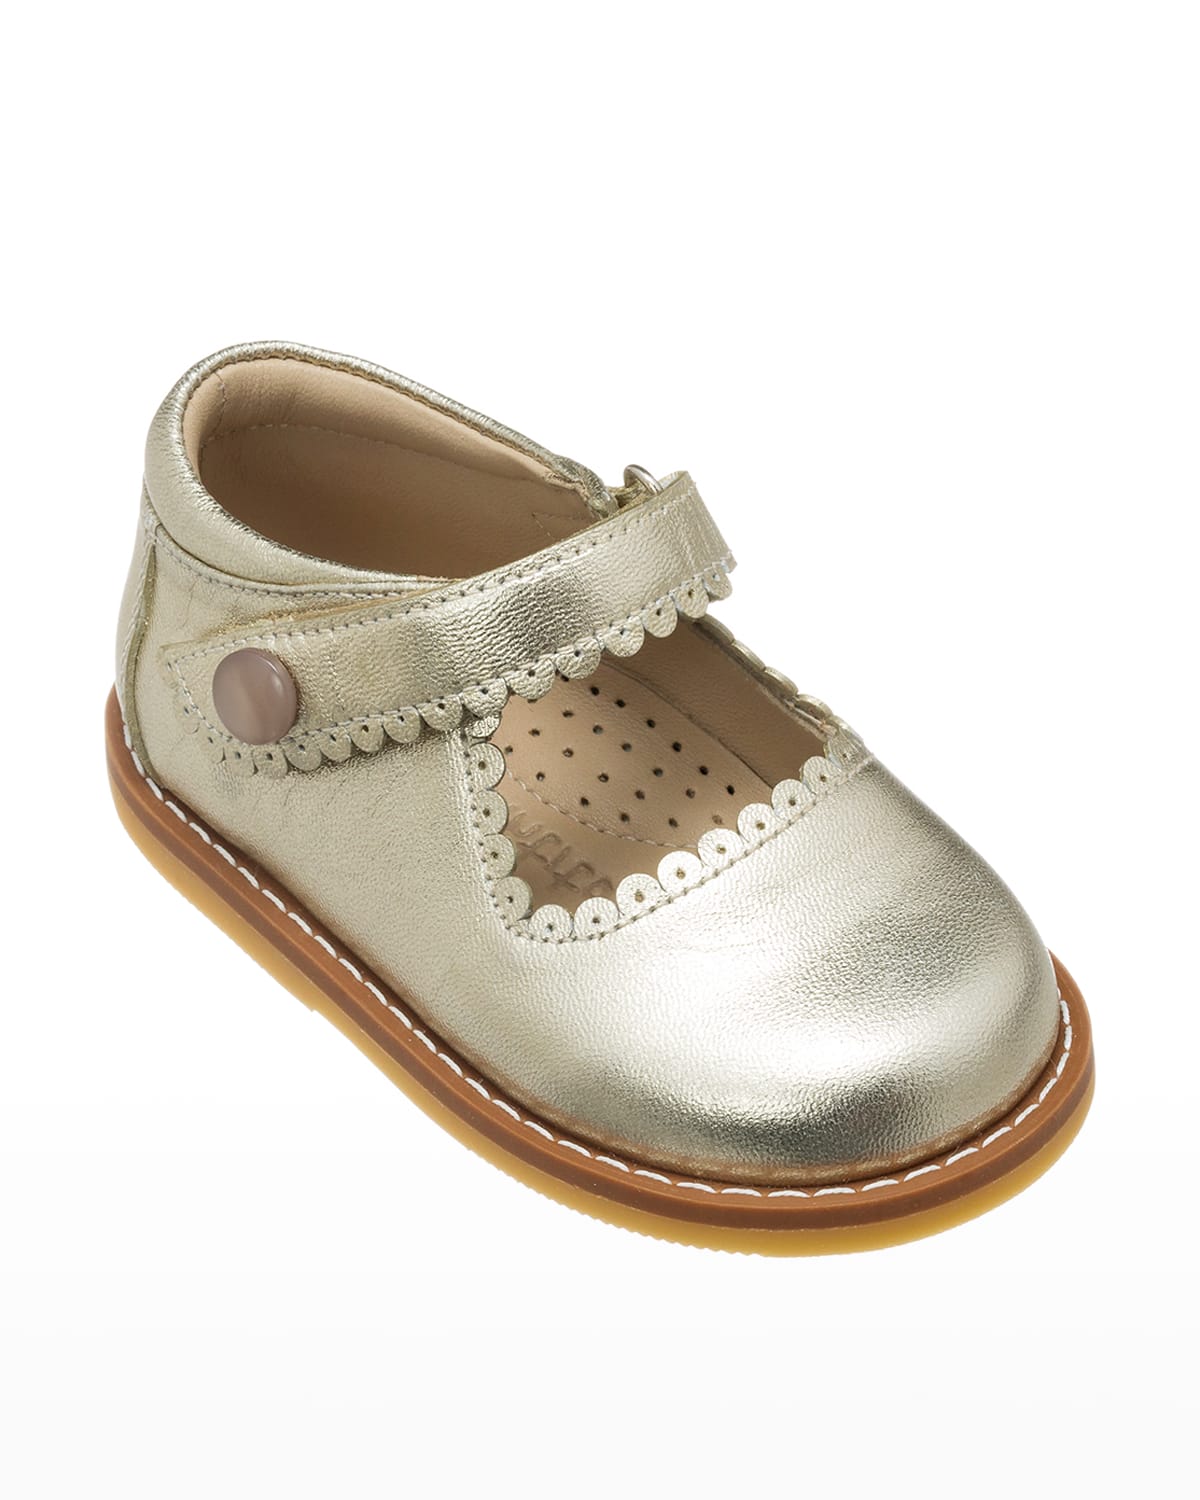 Elephantito Kids' Girl's Scalloped Leather Mary Janes, Toddler In Gold